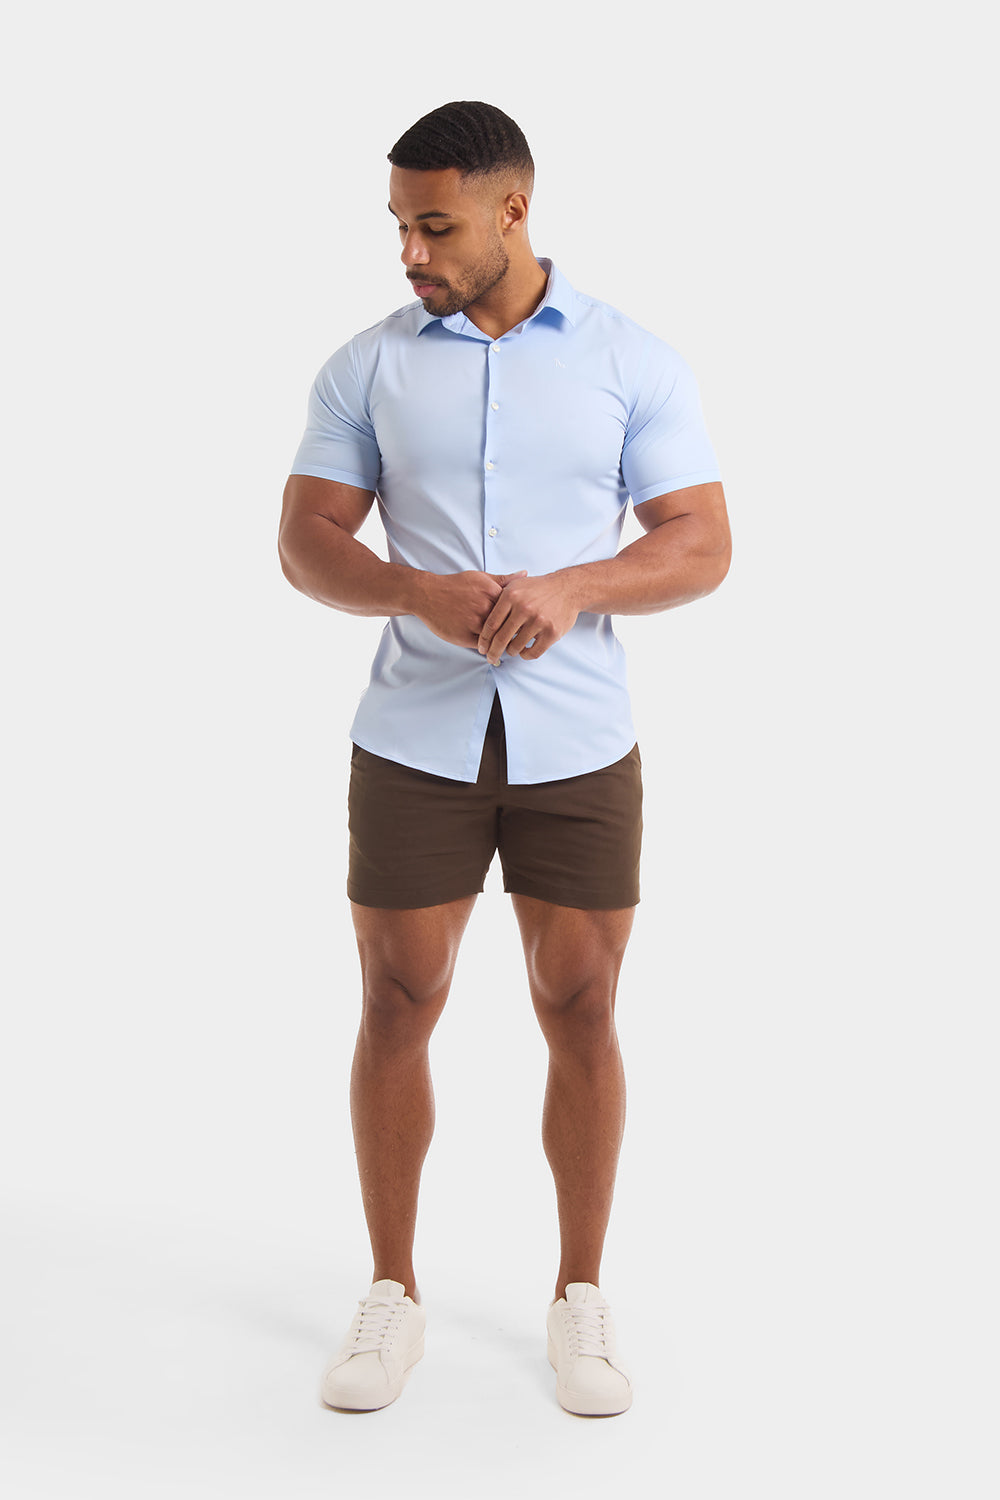 Muscle Fit Chino Shorts - Shorter Length in Khaki - TAILORED ATHLETE - ROW